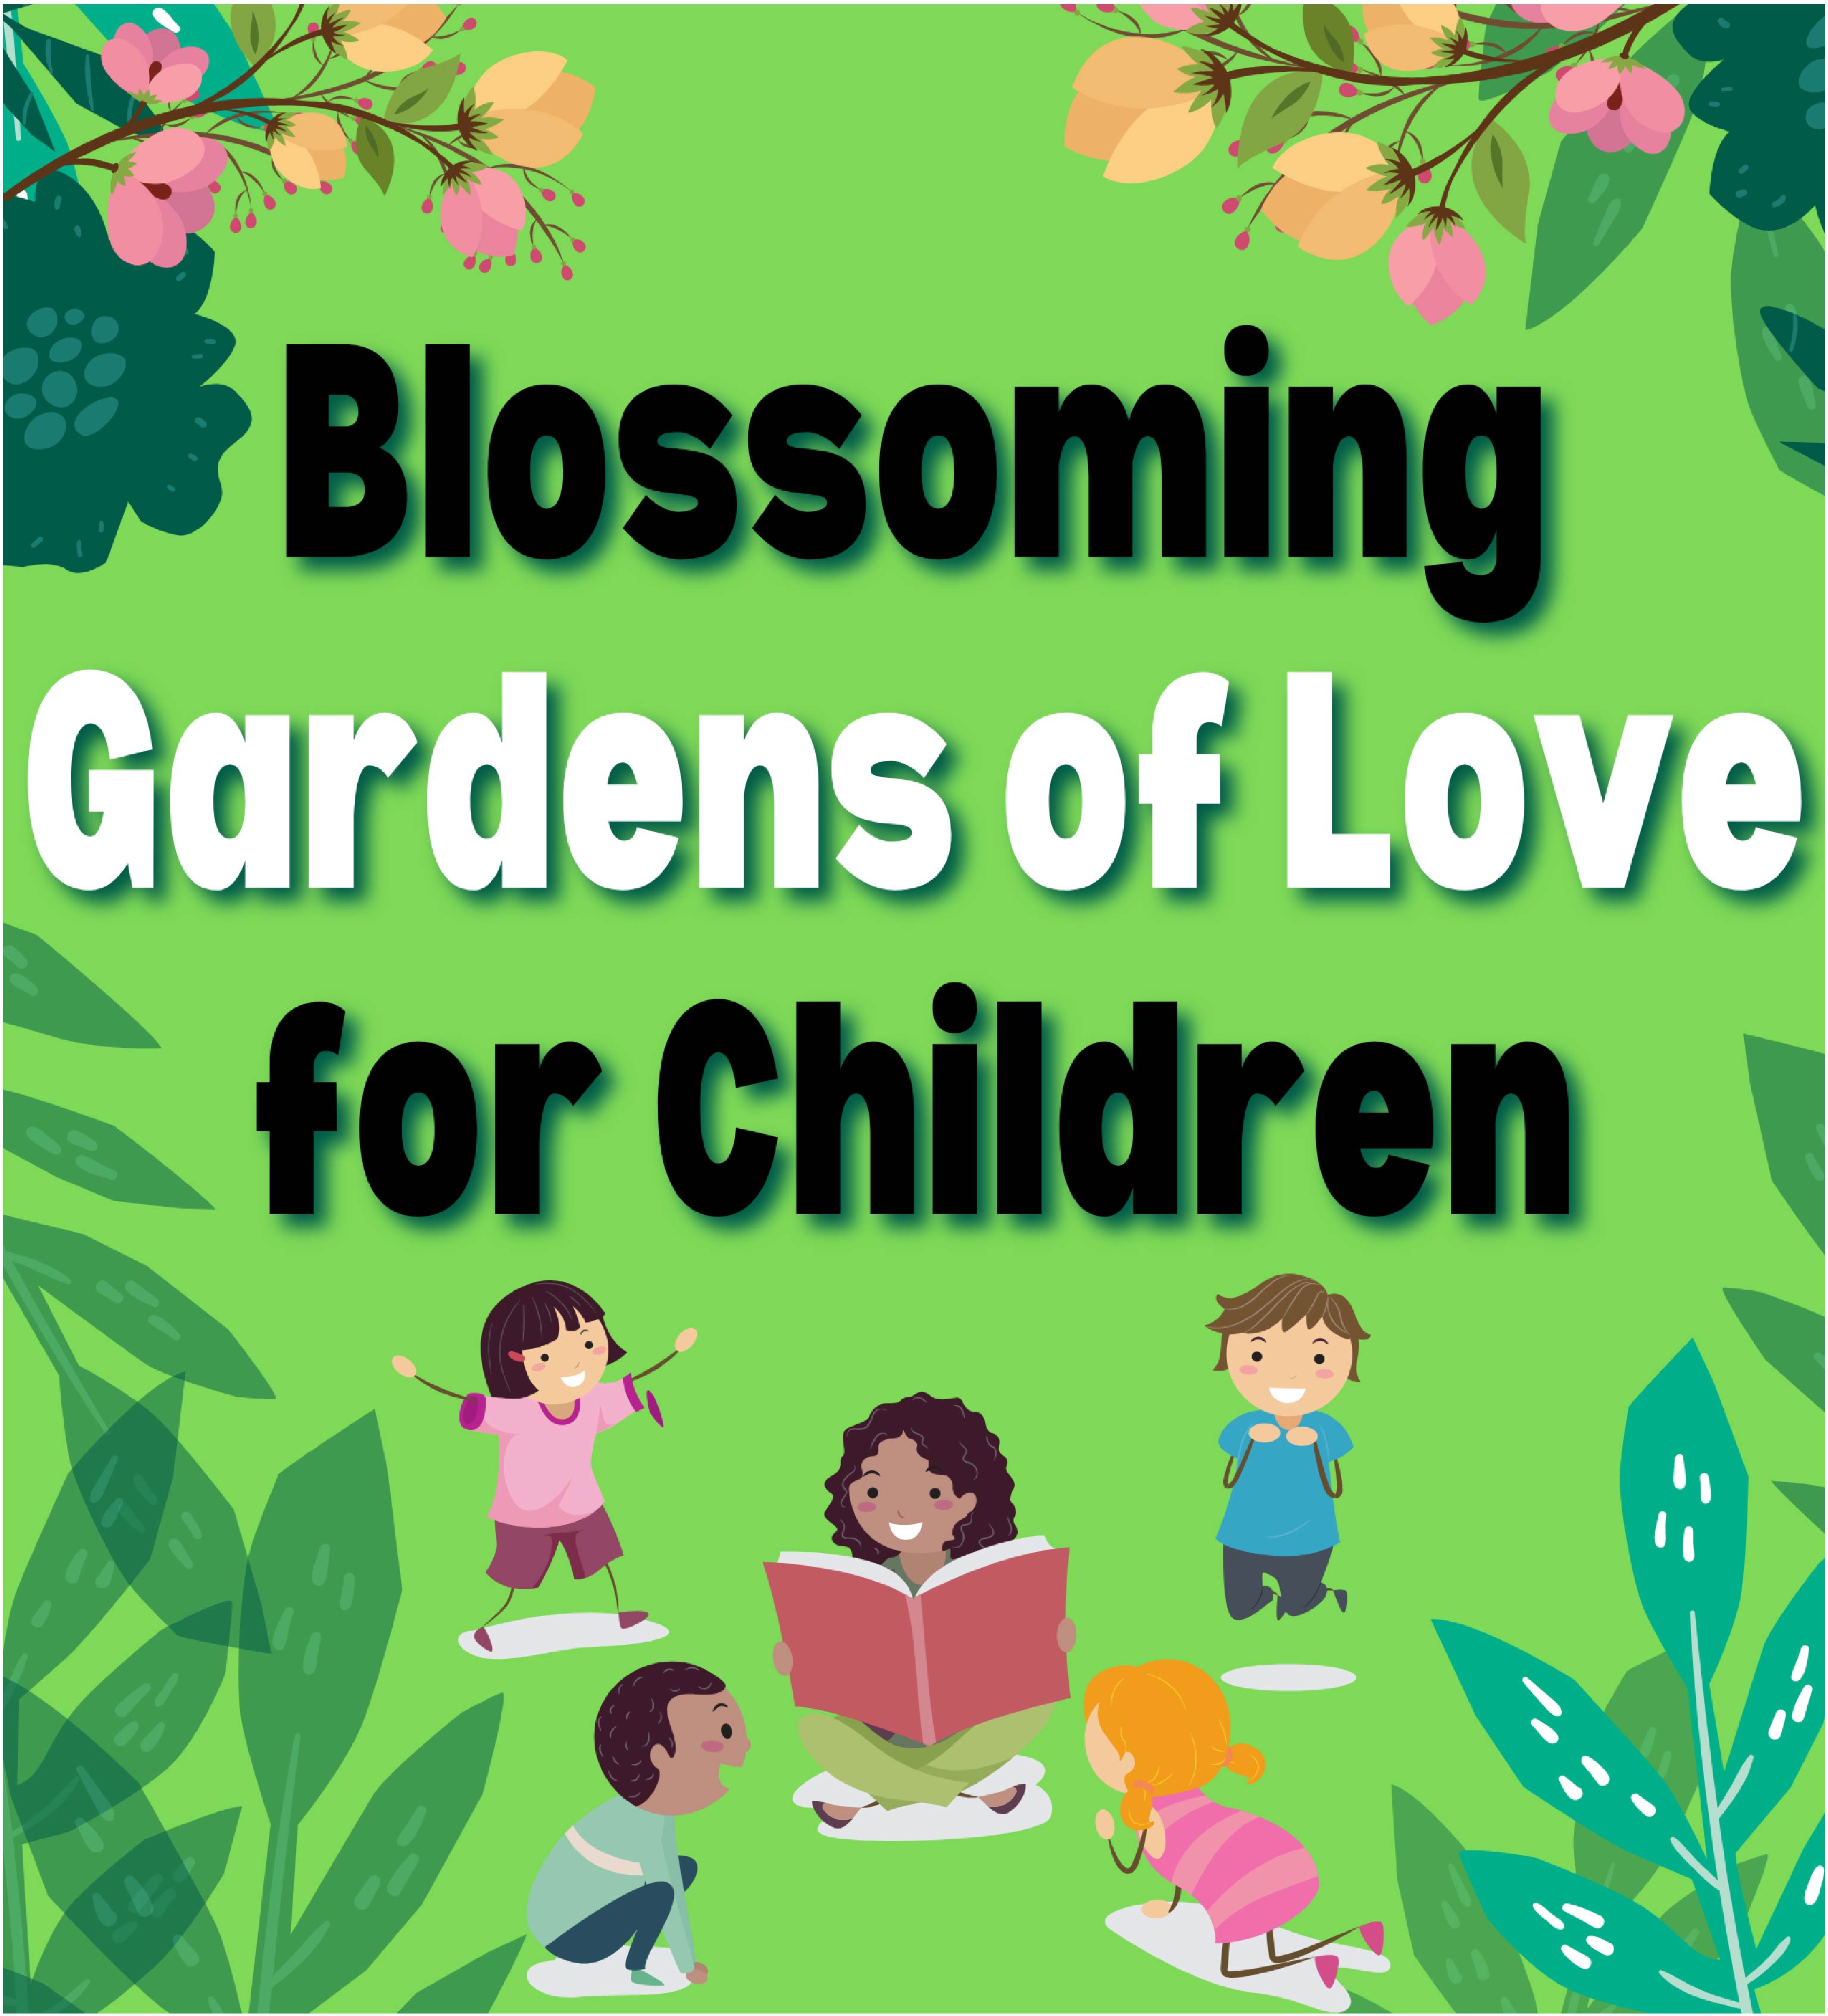 Image for LIVE_Blossoming Gardens of Love for Children